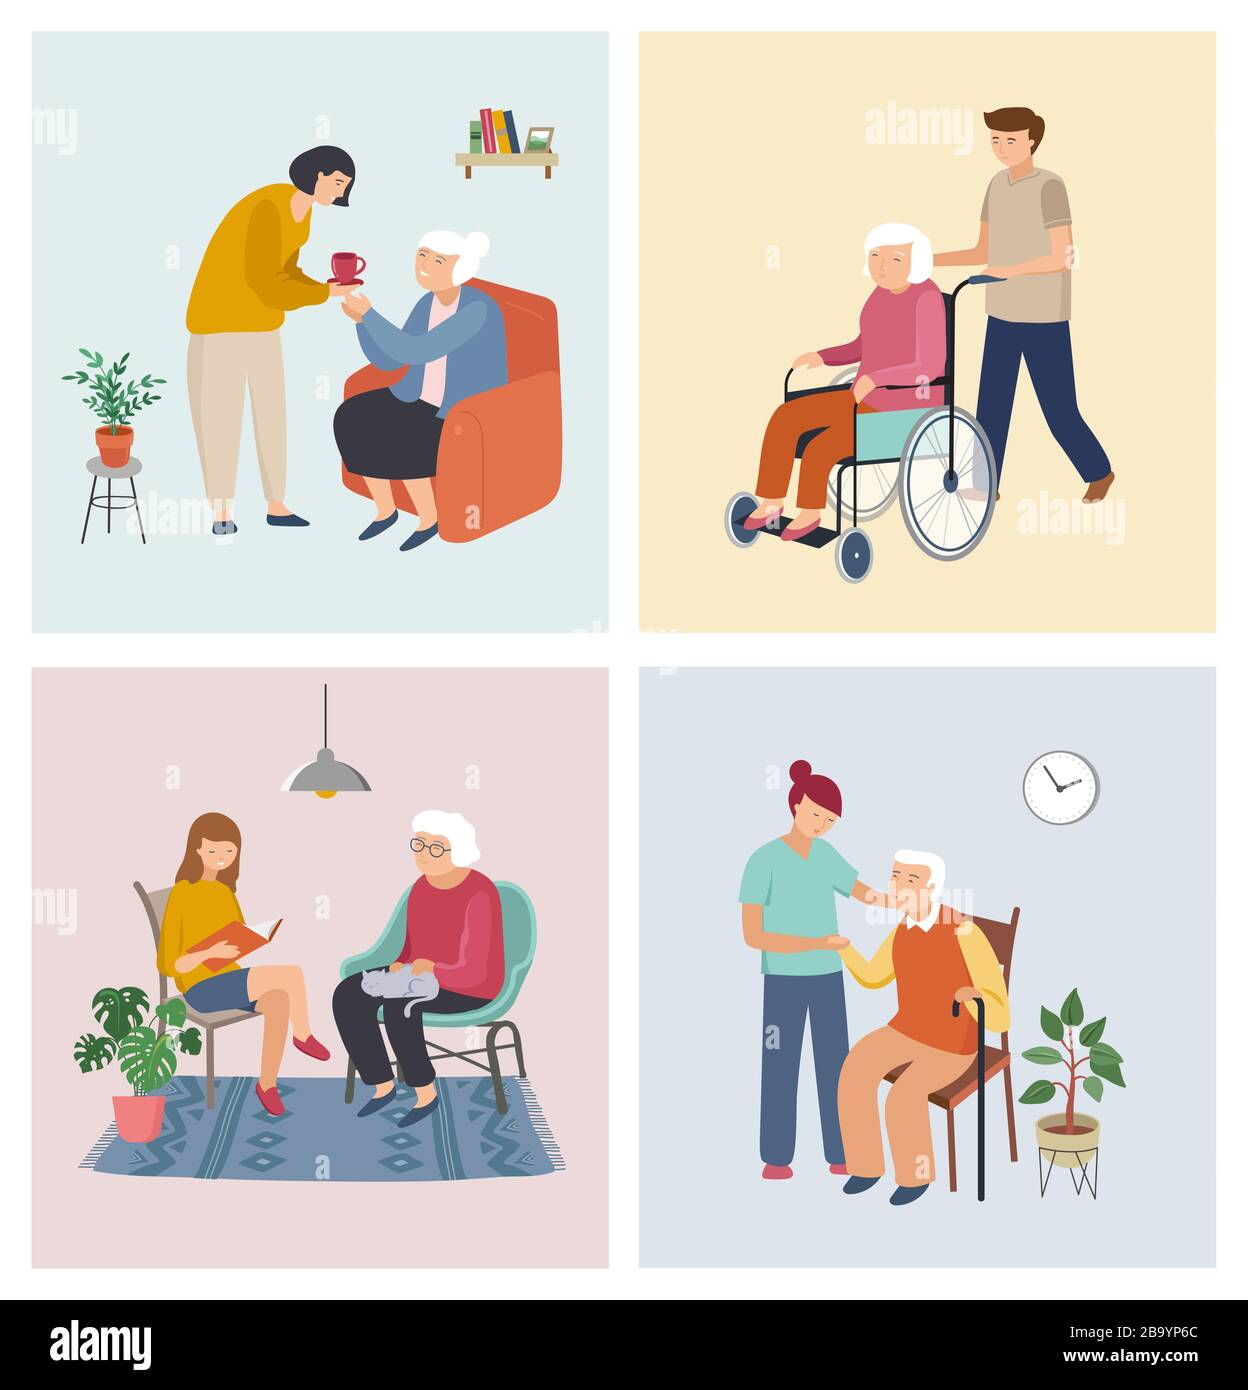 Volunteers series - young people taking care of seniors people. Helping with household chores, walking, reading books, bringing the grocery, pushing Stock Vector